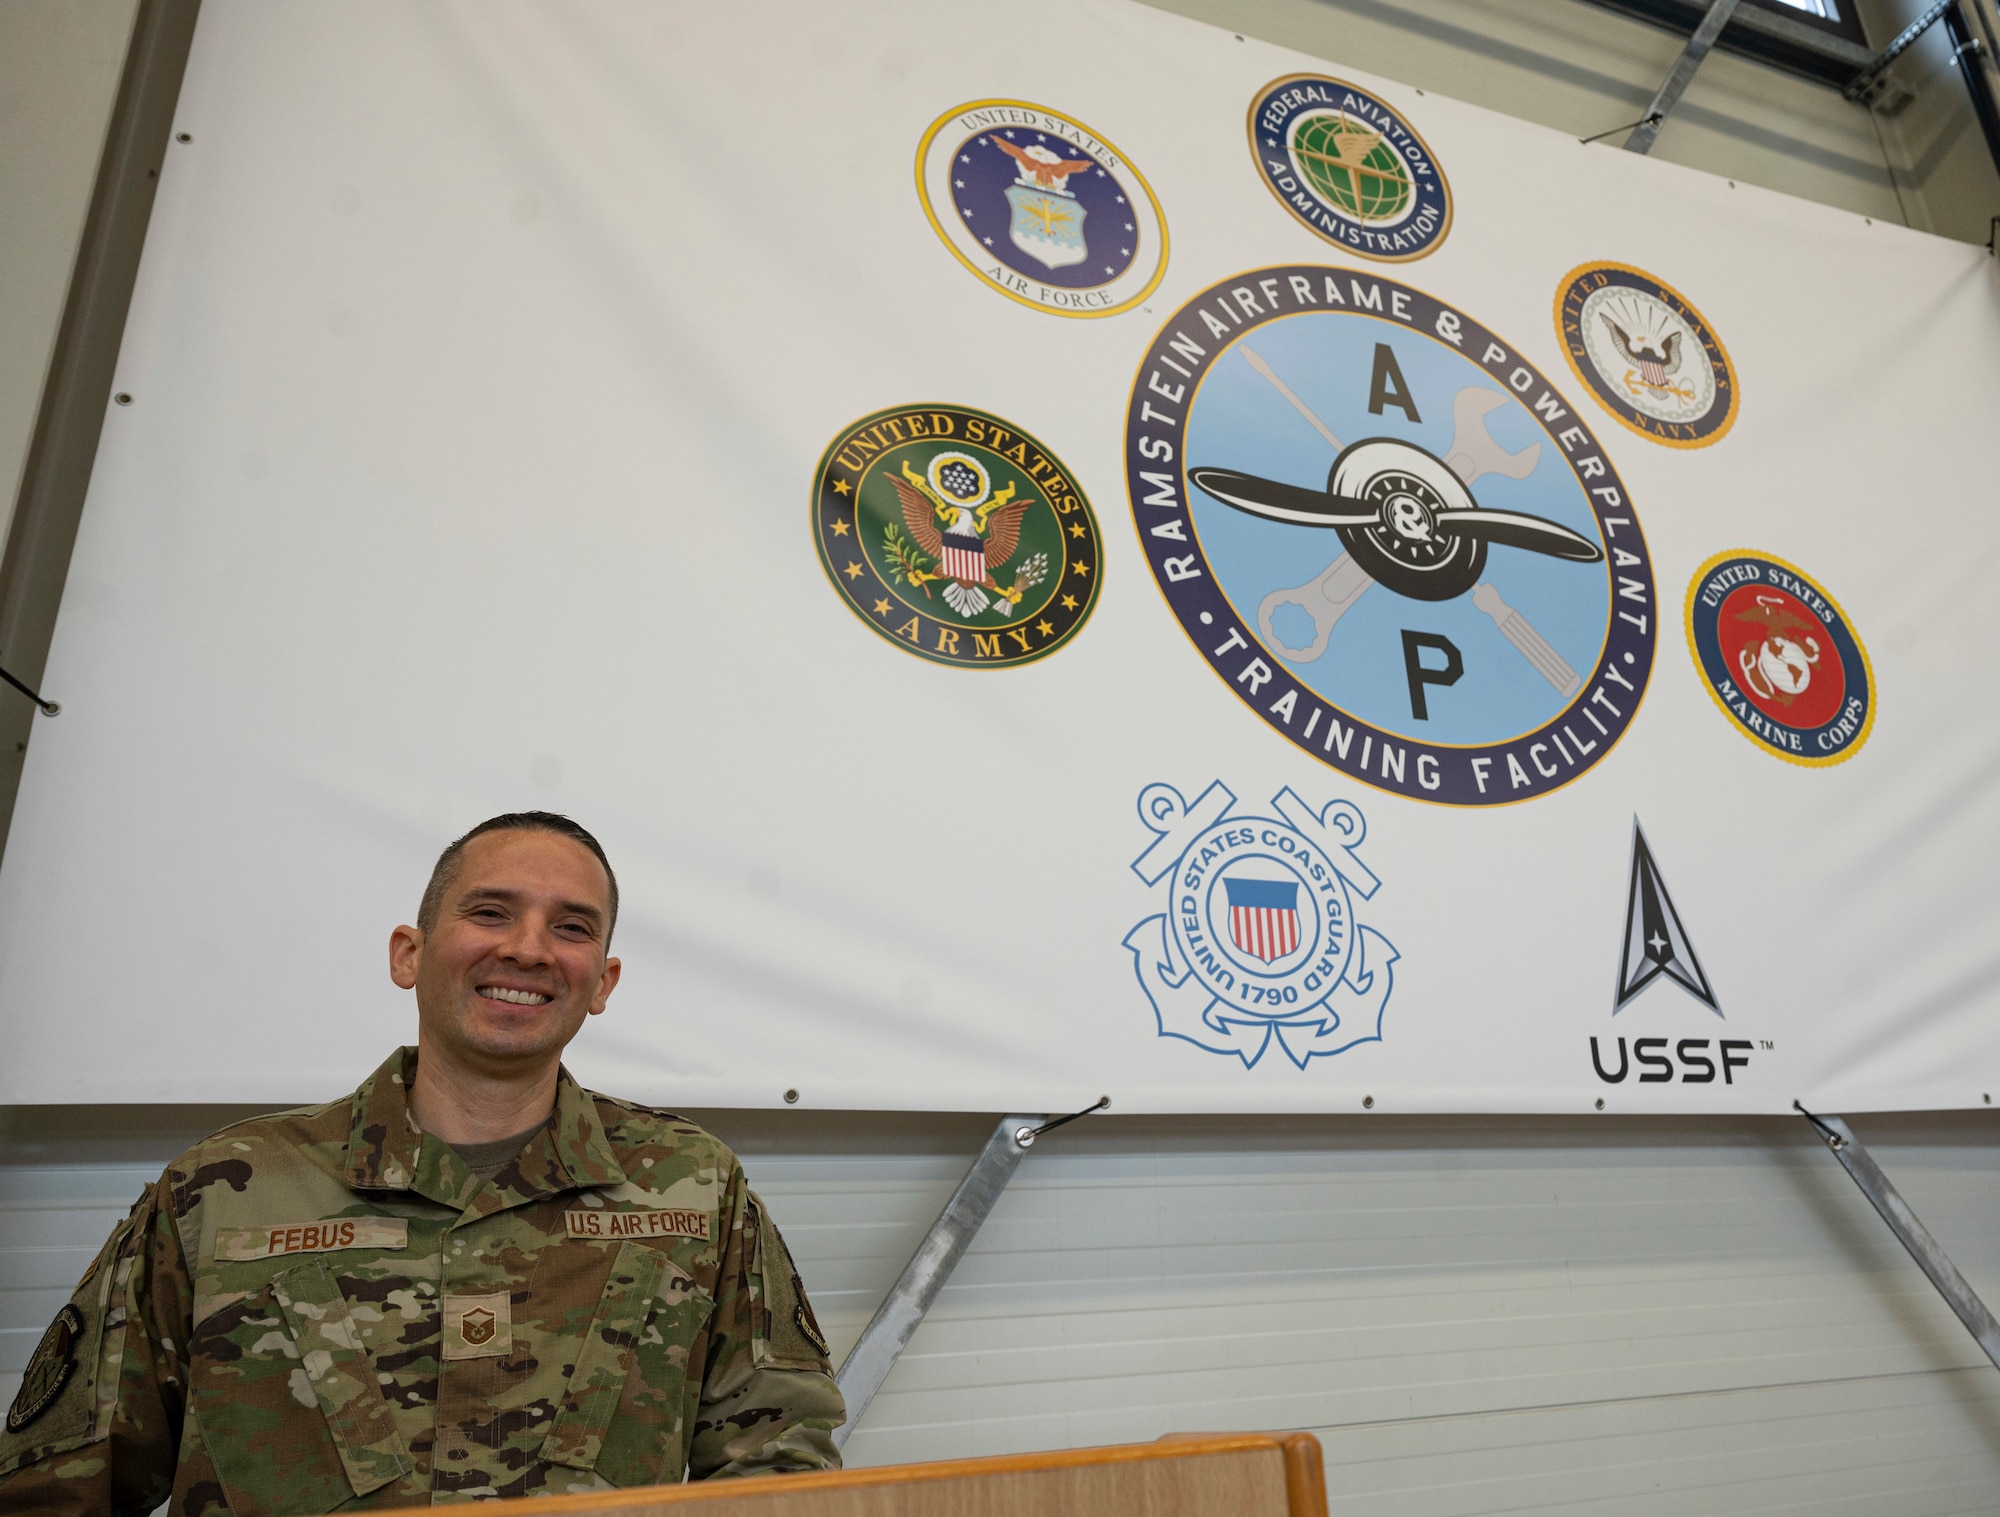 U.S. Air Force Master Sgt. Jaime Febus, 86th Maintenance Group Airframe and Powerplant program manager, poses for a photo at the Ramstein Airframe and Powerplant Facility at Ramstein Air Base, Germany, Nov. 16, 2022. Febus partnered with the Federal Aviation Administration to open the facility because of his desire to help those in the Ramstein maintenance community. (U.S. Air Force photo by Senior Airman Thomas Karol)